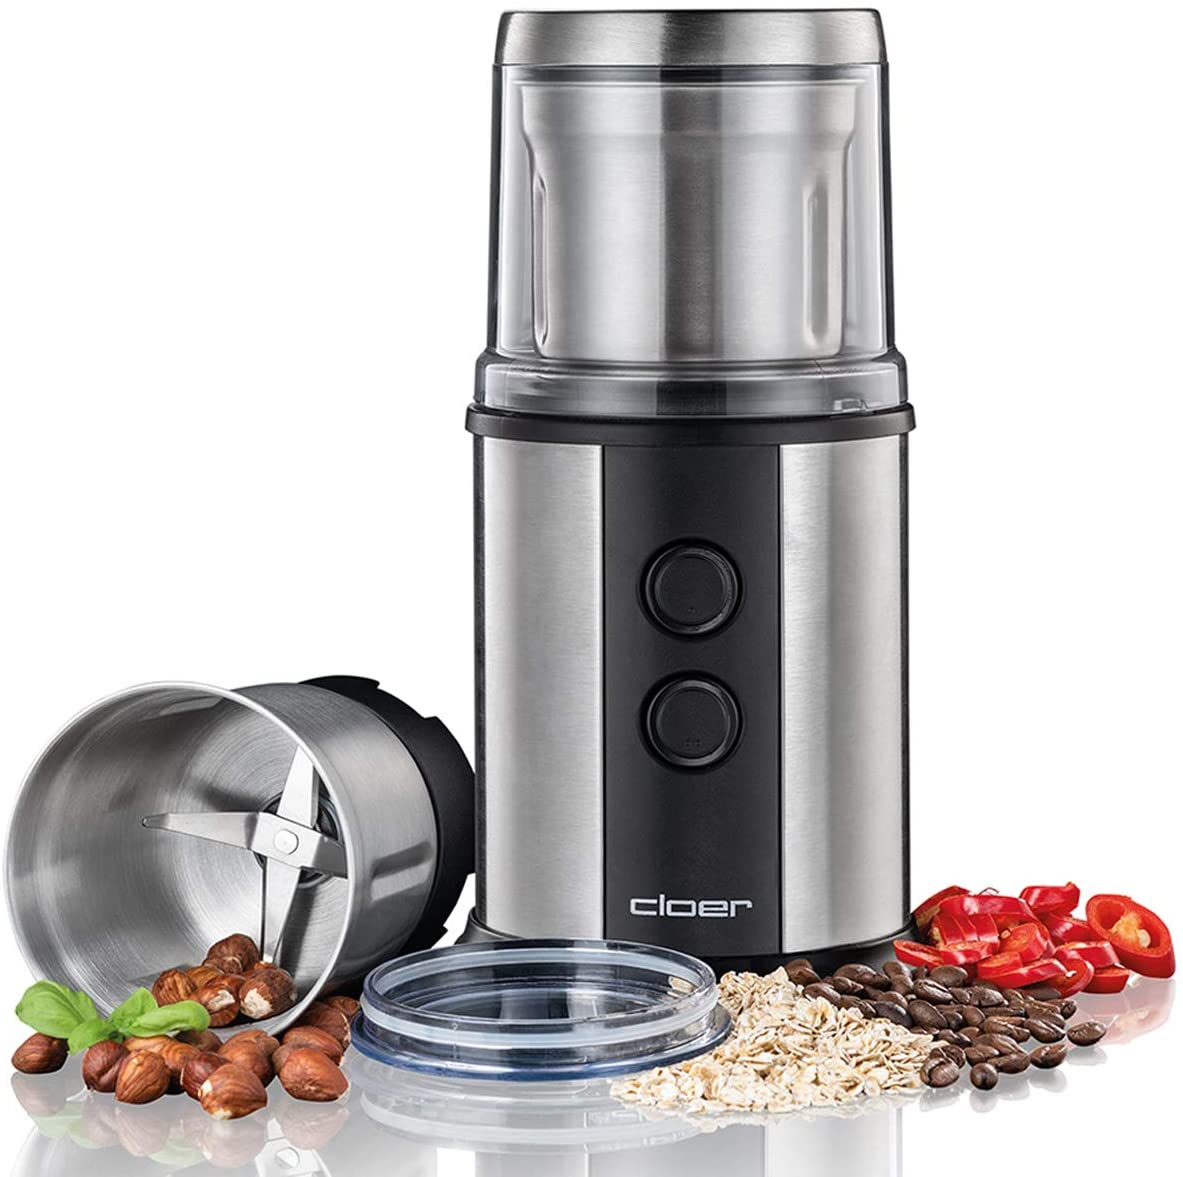 Cloer 7419 Electric Coffee and Spice Mill with Stainless Steel Strike Knife, 350 W, 2 Removable Stainless Steel Containers, for Pesto, Herbs, Nuts and Grains, up to 80 g Coffee Beans, Aroma Protection Lid